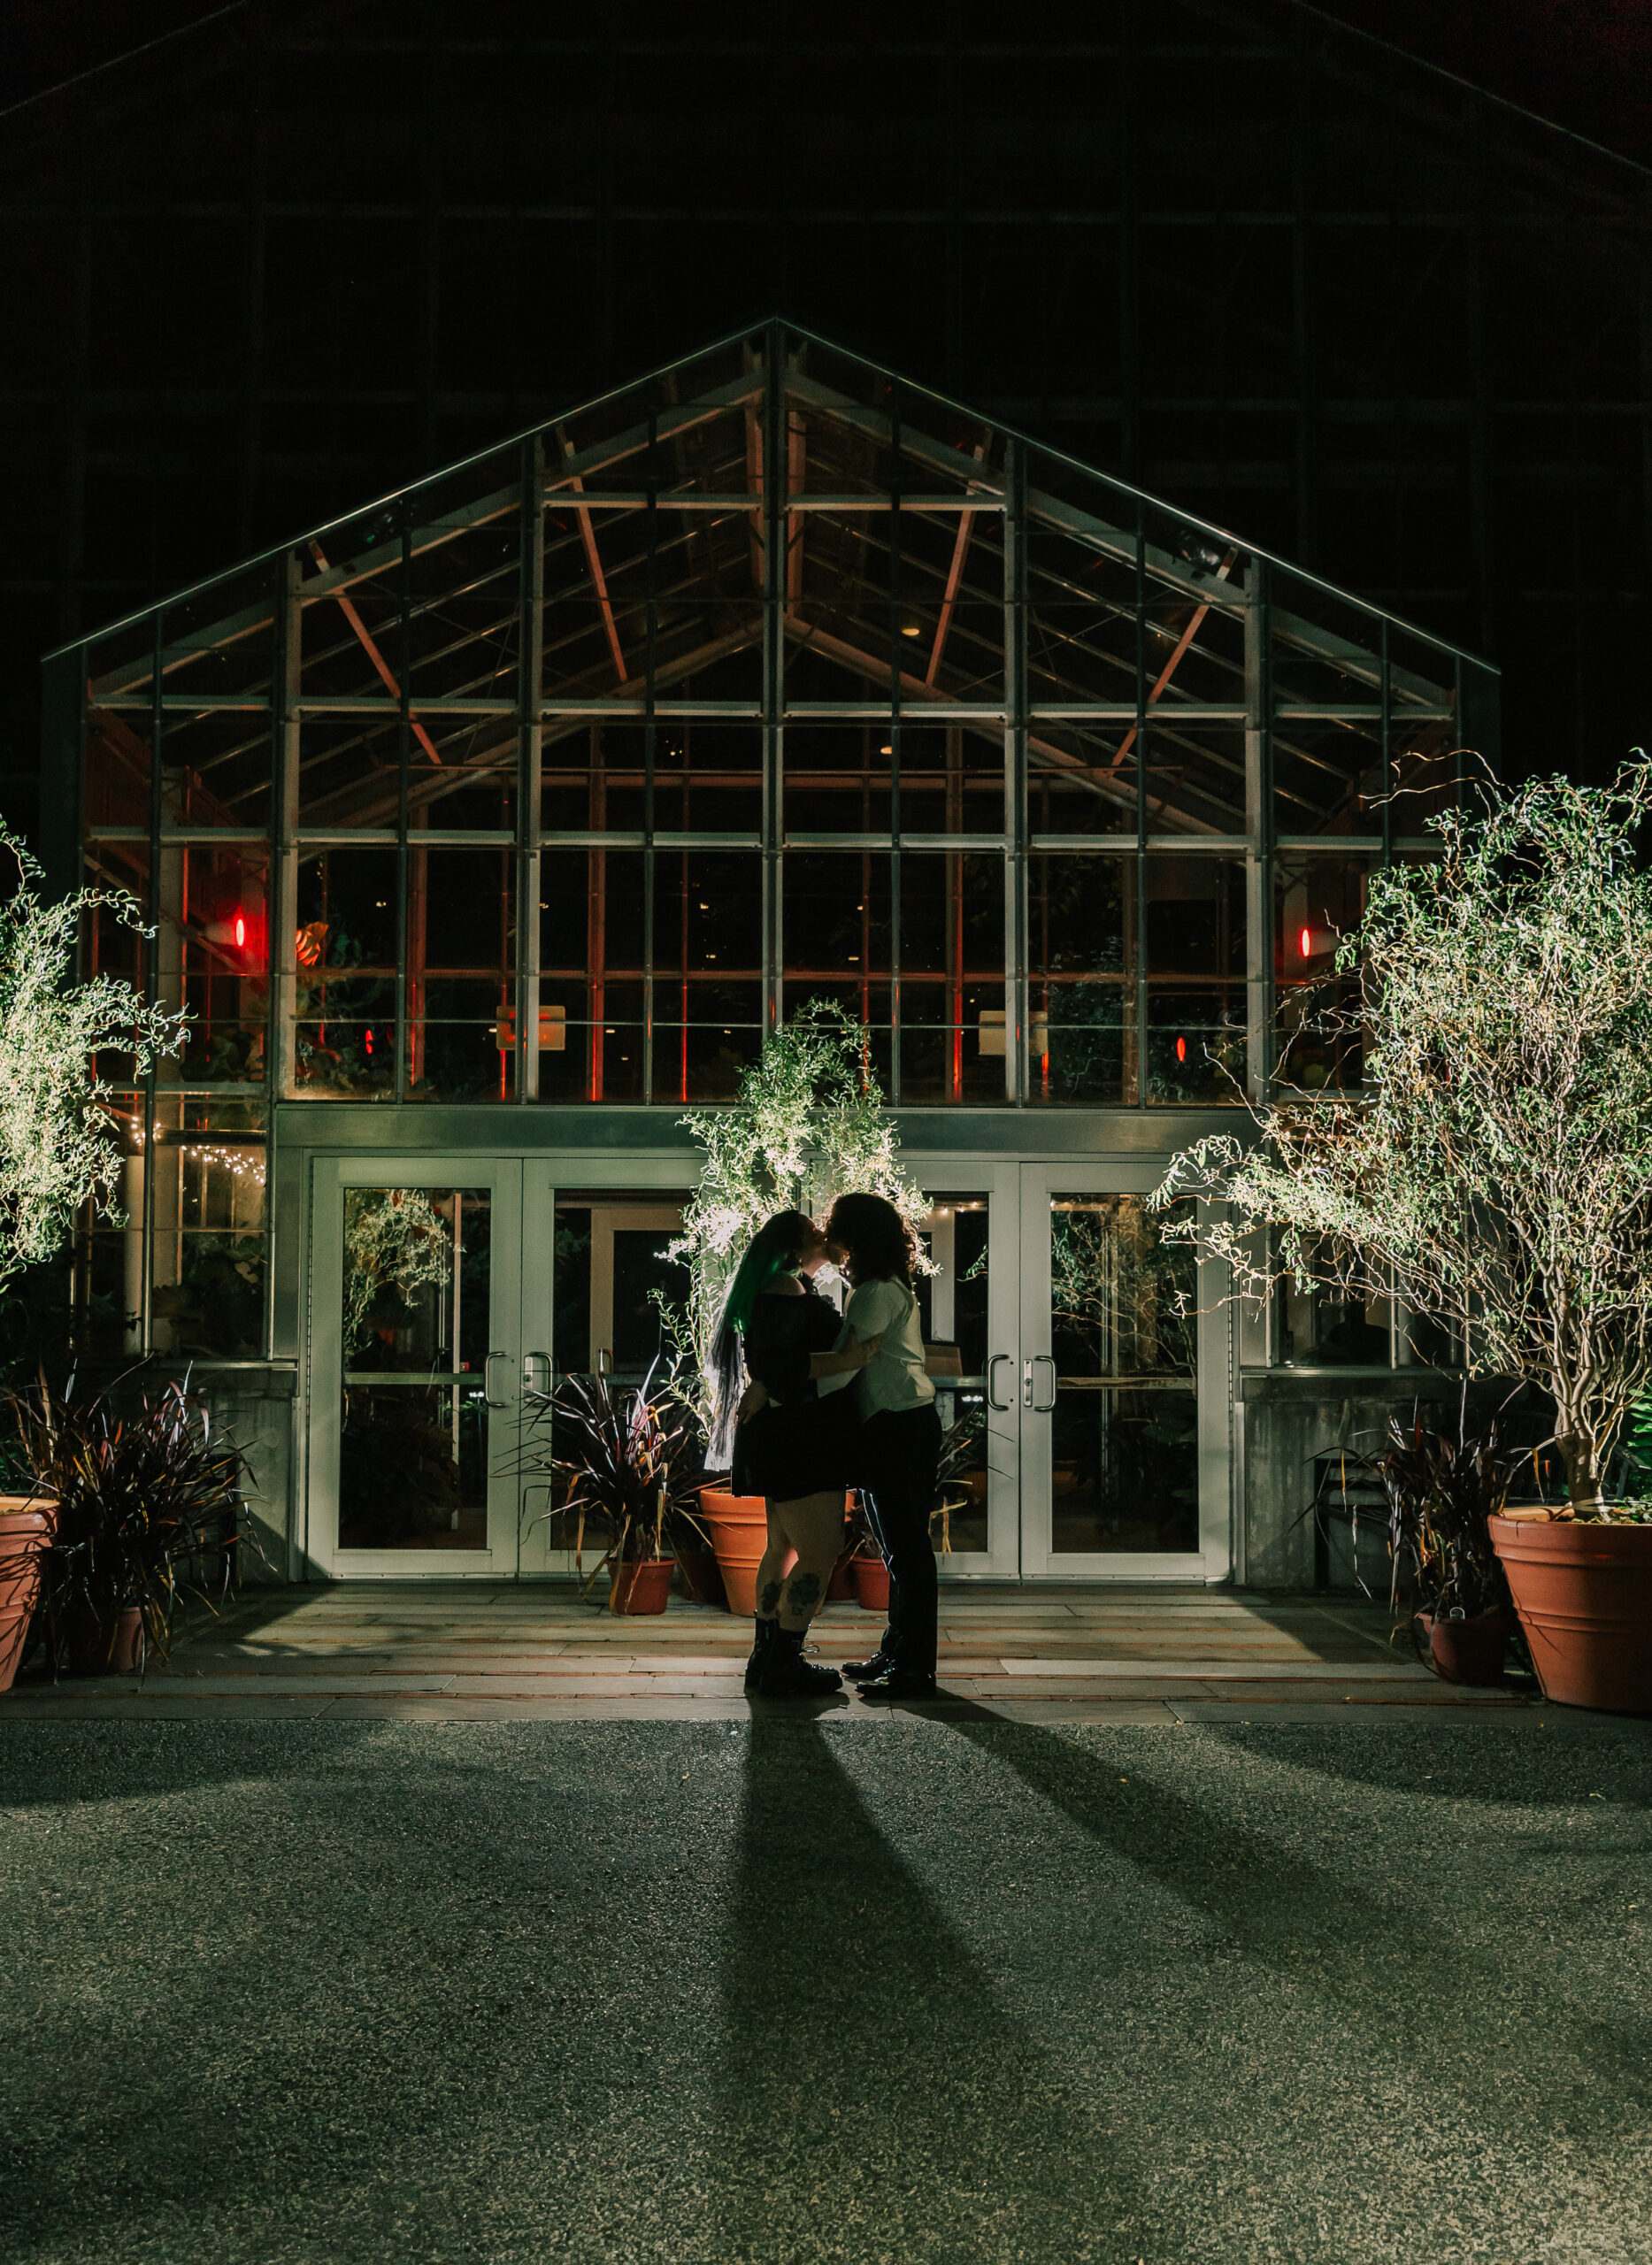 newly married couple posing for a night shot outside the greenhouse at Roger Williams Botanical Garden